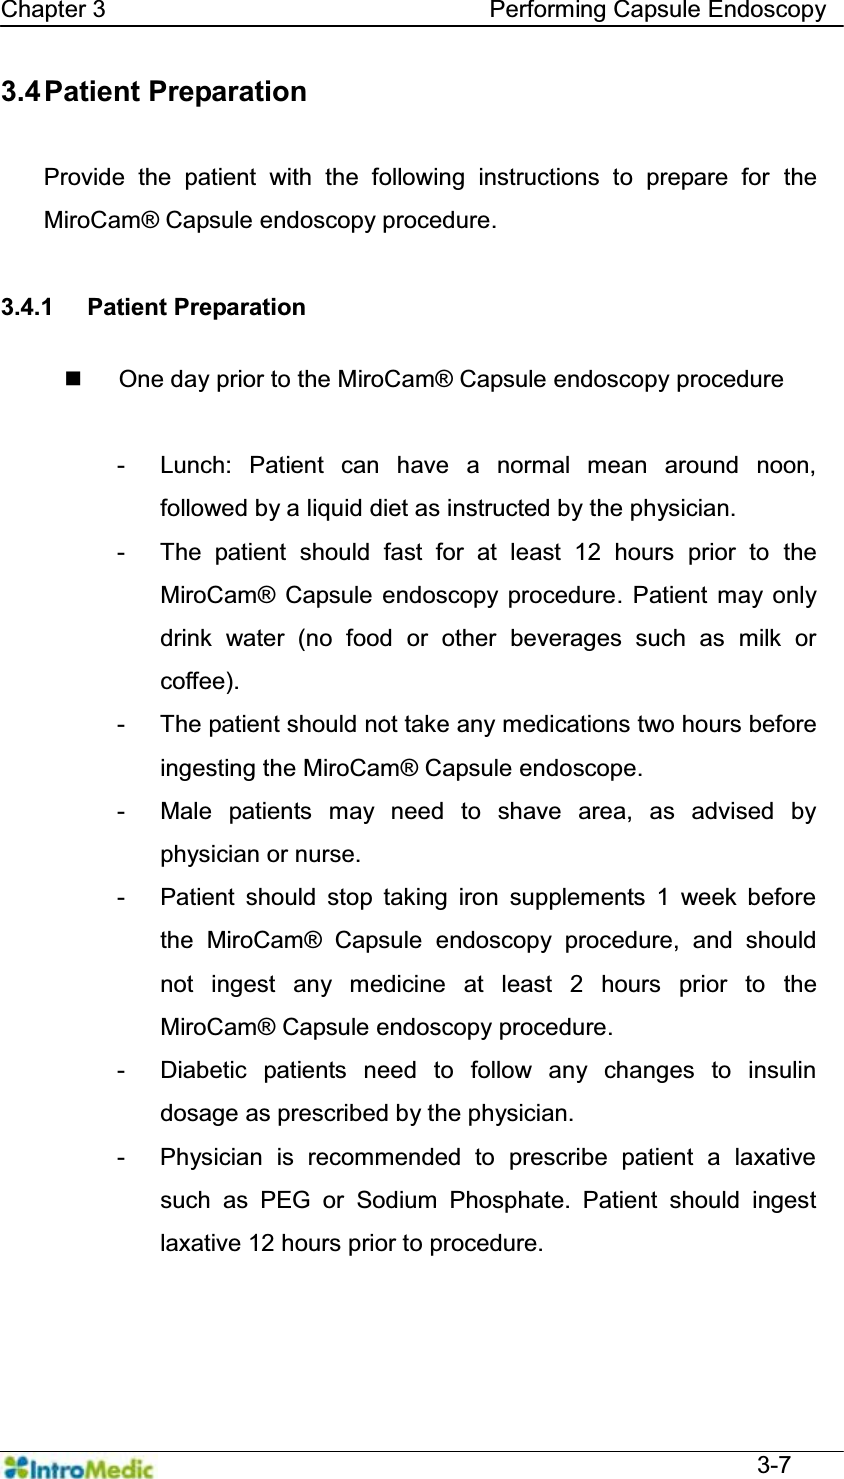   Chapter 3                                Performing Capsule Endoscopy  3-7 3.4 Patient  Preparation  Provide the patient with the following instructions to prepare for the MiroCam® Capsule endoscopy procedure.  3.4.1 Patient Preparation    One day prior to the MiroCam® Capsule endoscopy procedure  - Lunch: Patient can have a normal mean around noon, followed by a liquid diet as instructed by the physician. -  The patient should fast for at least 12 hours prior to the MiroCam® Capsule endoscopy procedure. Patient may only drink water (no food or other beverages such as milk or coffee). -  The patient should not take any medications two hours before ingesting the MiroCam® Capsule endoscope. -  Male patients may need to shave area, as advised by physician or nurse. -  Patient should stop taking iron supplements 1 week before the MiroCam® Capsule endoscopy procedure, and should not ingest any medicine at least 2 hours prior to the MiroCam® Capsule endoscopy procedure. -  Diabetic patients need to follow any changes to insulin dosage as prescribed by the physician.   - Physician is recommended to prescribe patient a laxative such as PEG or Sodium Phosphate. Patient should ingest laxative 12 hours prior to procedure.   